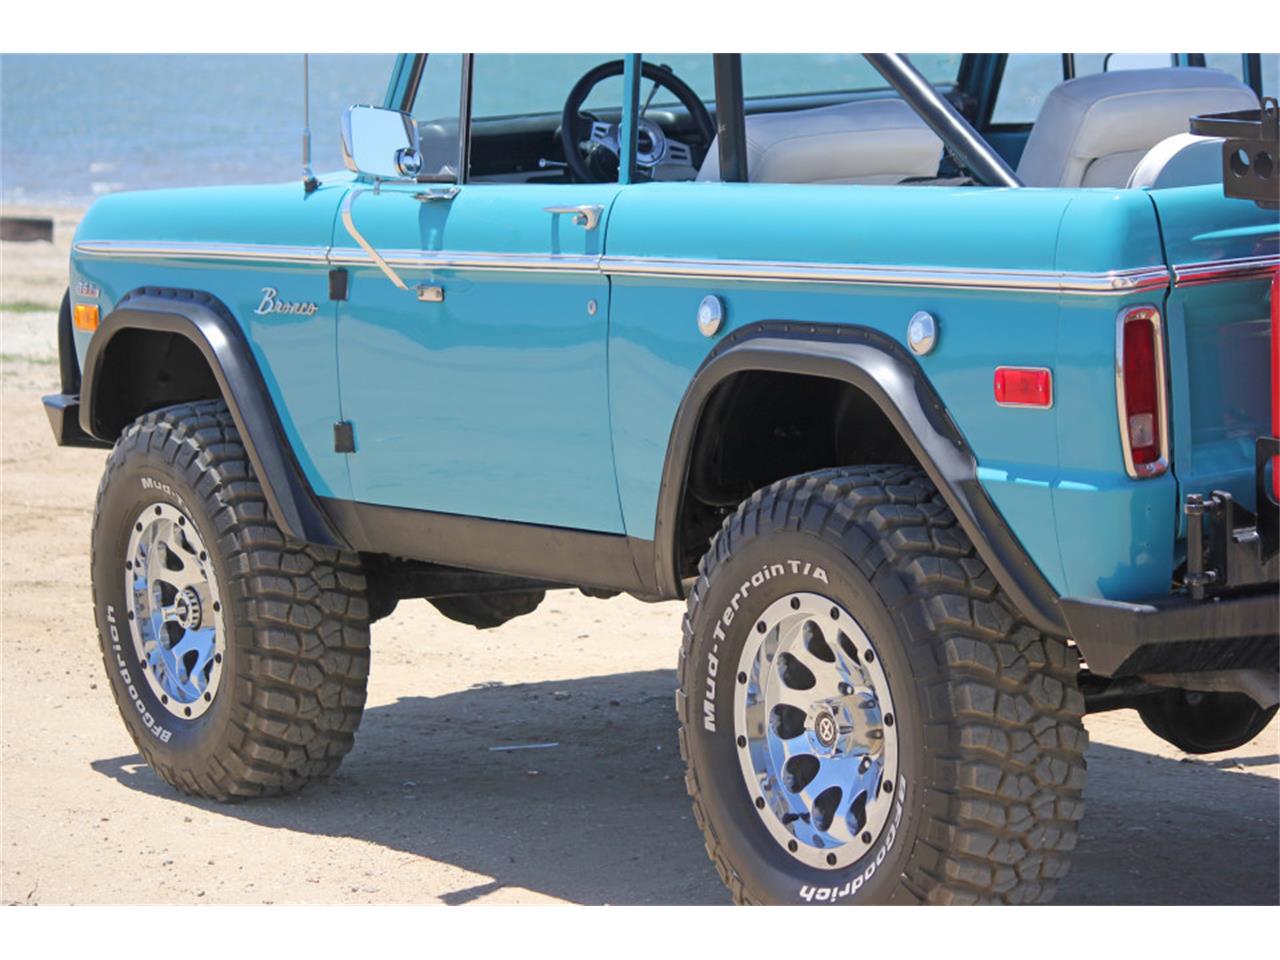 1970 Ford Bronco For Sale Cc 996058